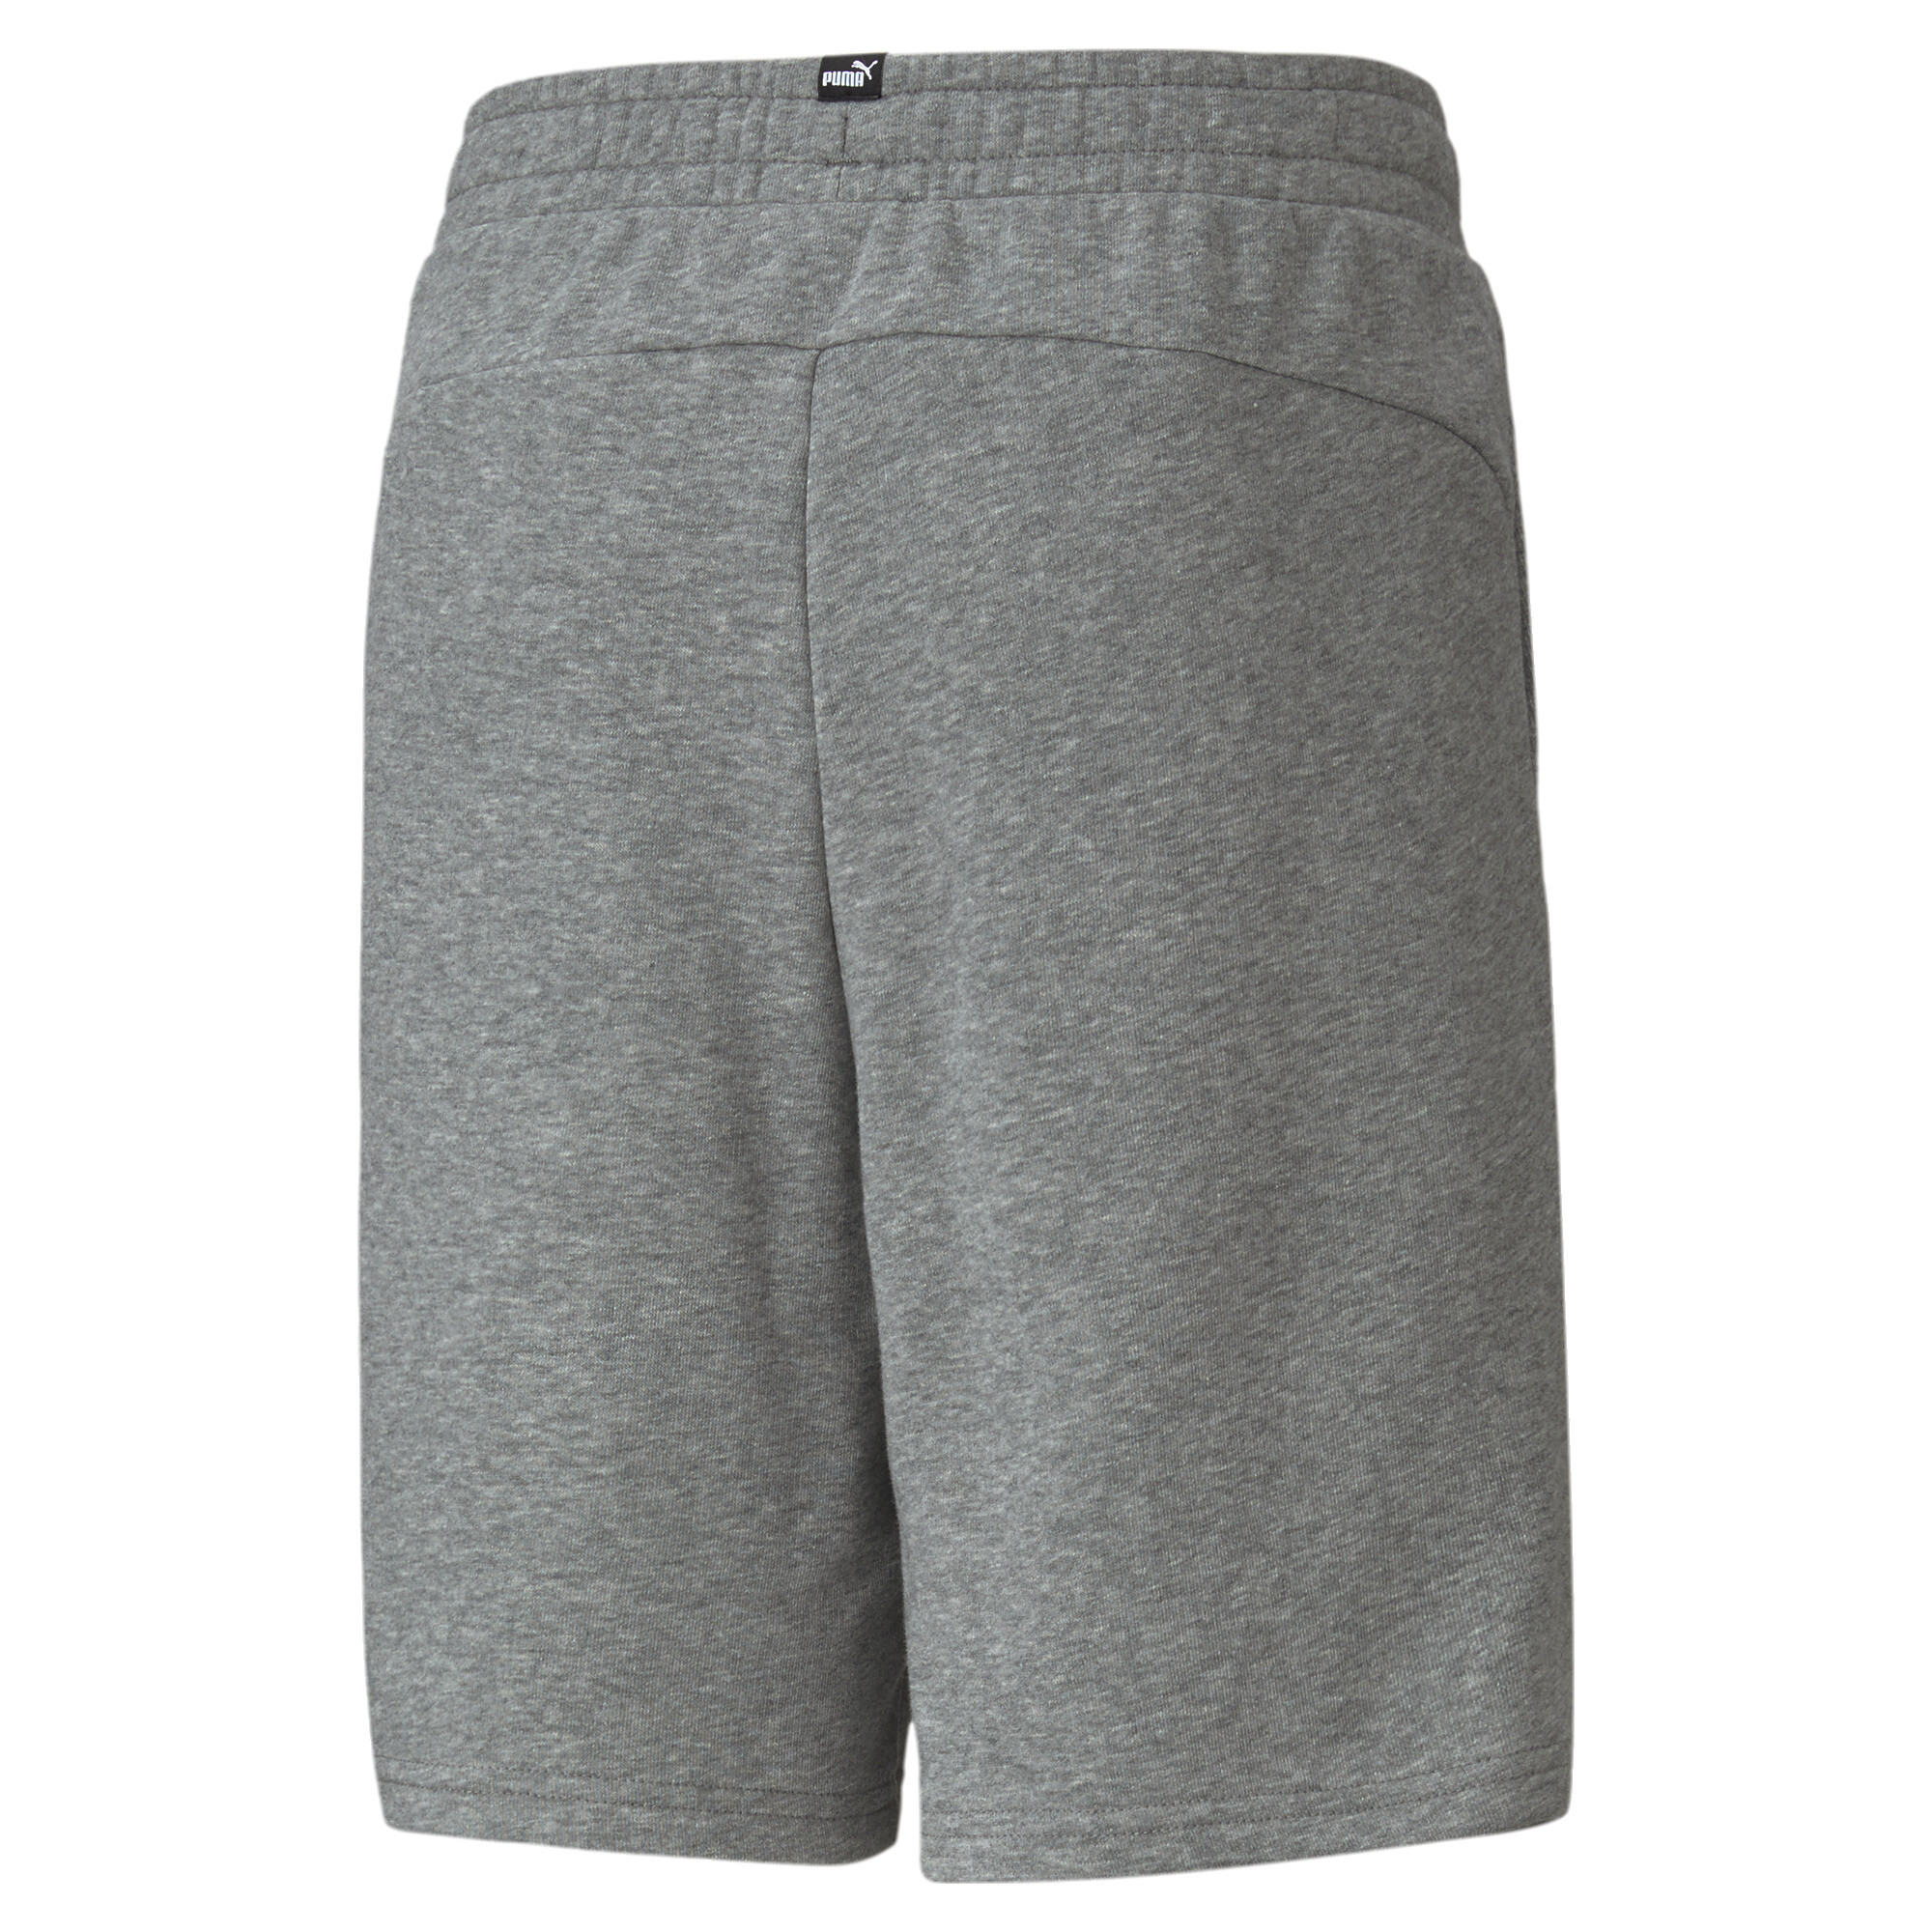 PUMA Essentials Sweat Shorts In Heather, Size 7-8 Youth